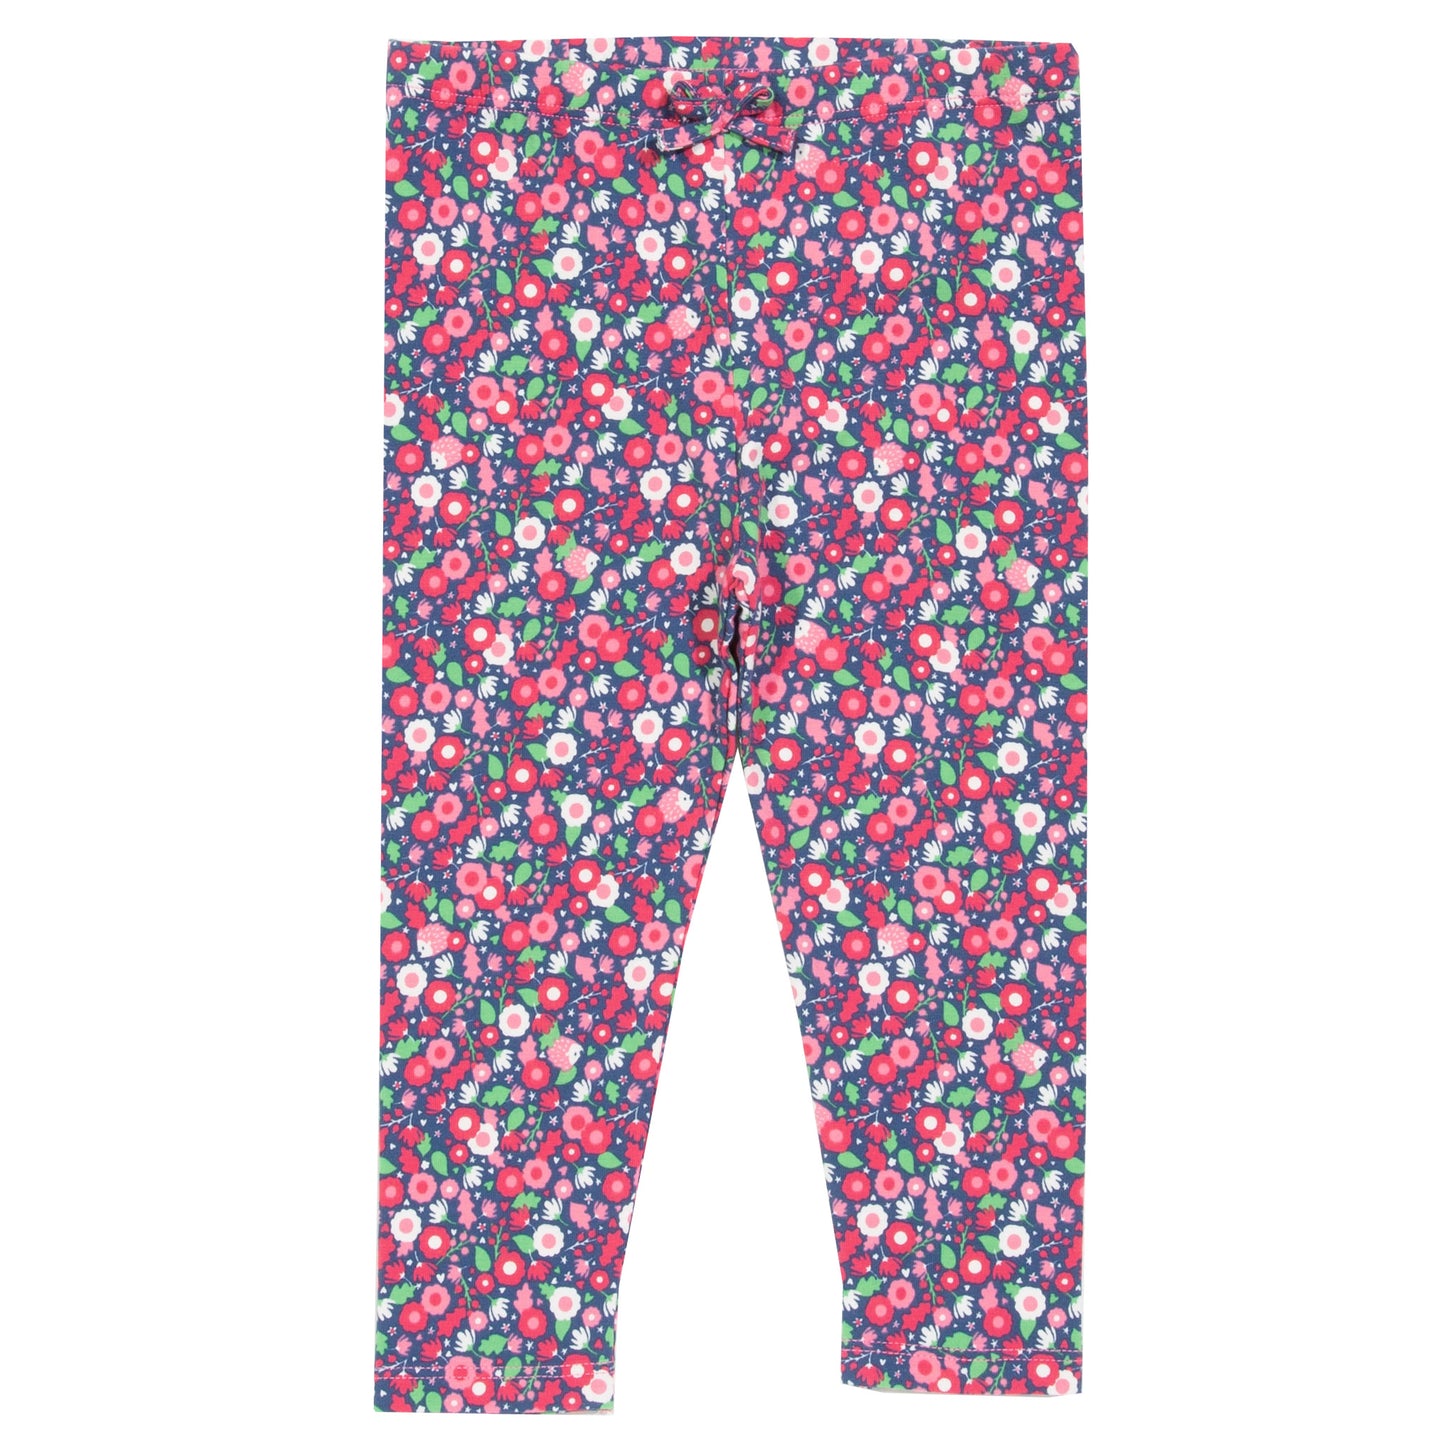 Hedgerow leggings with bow